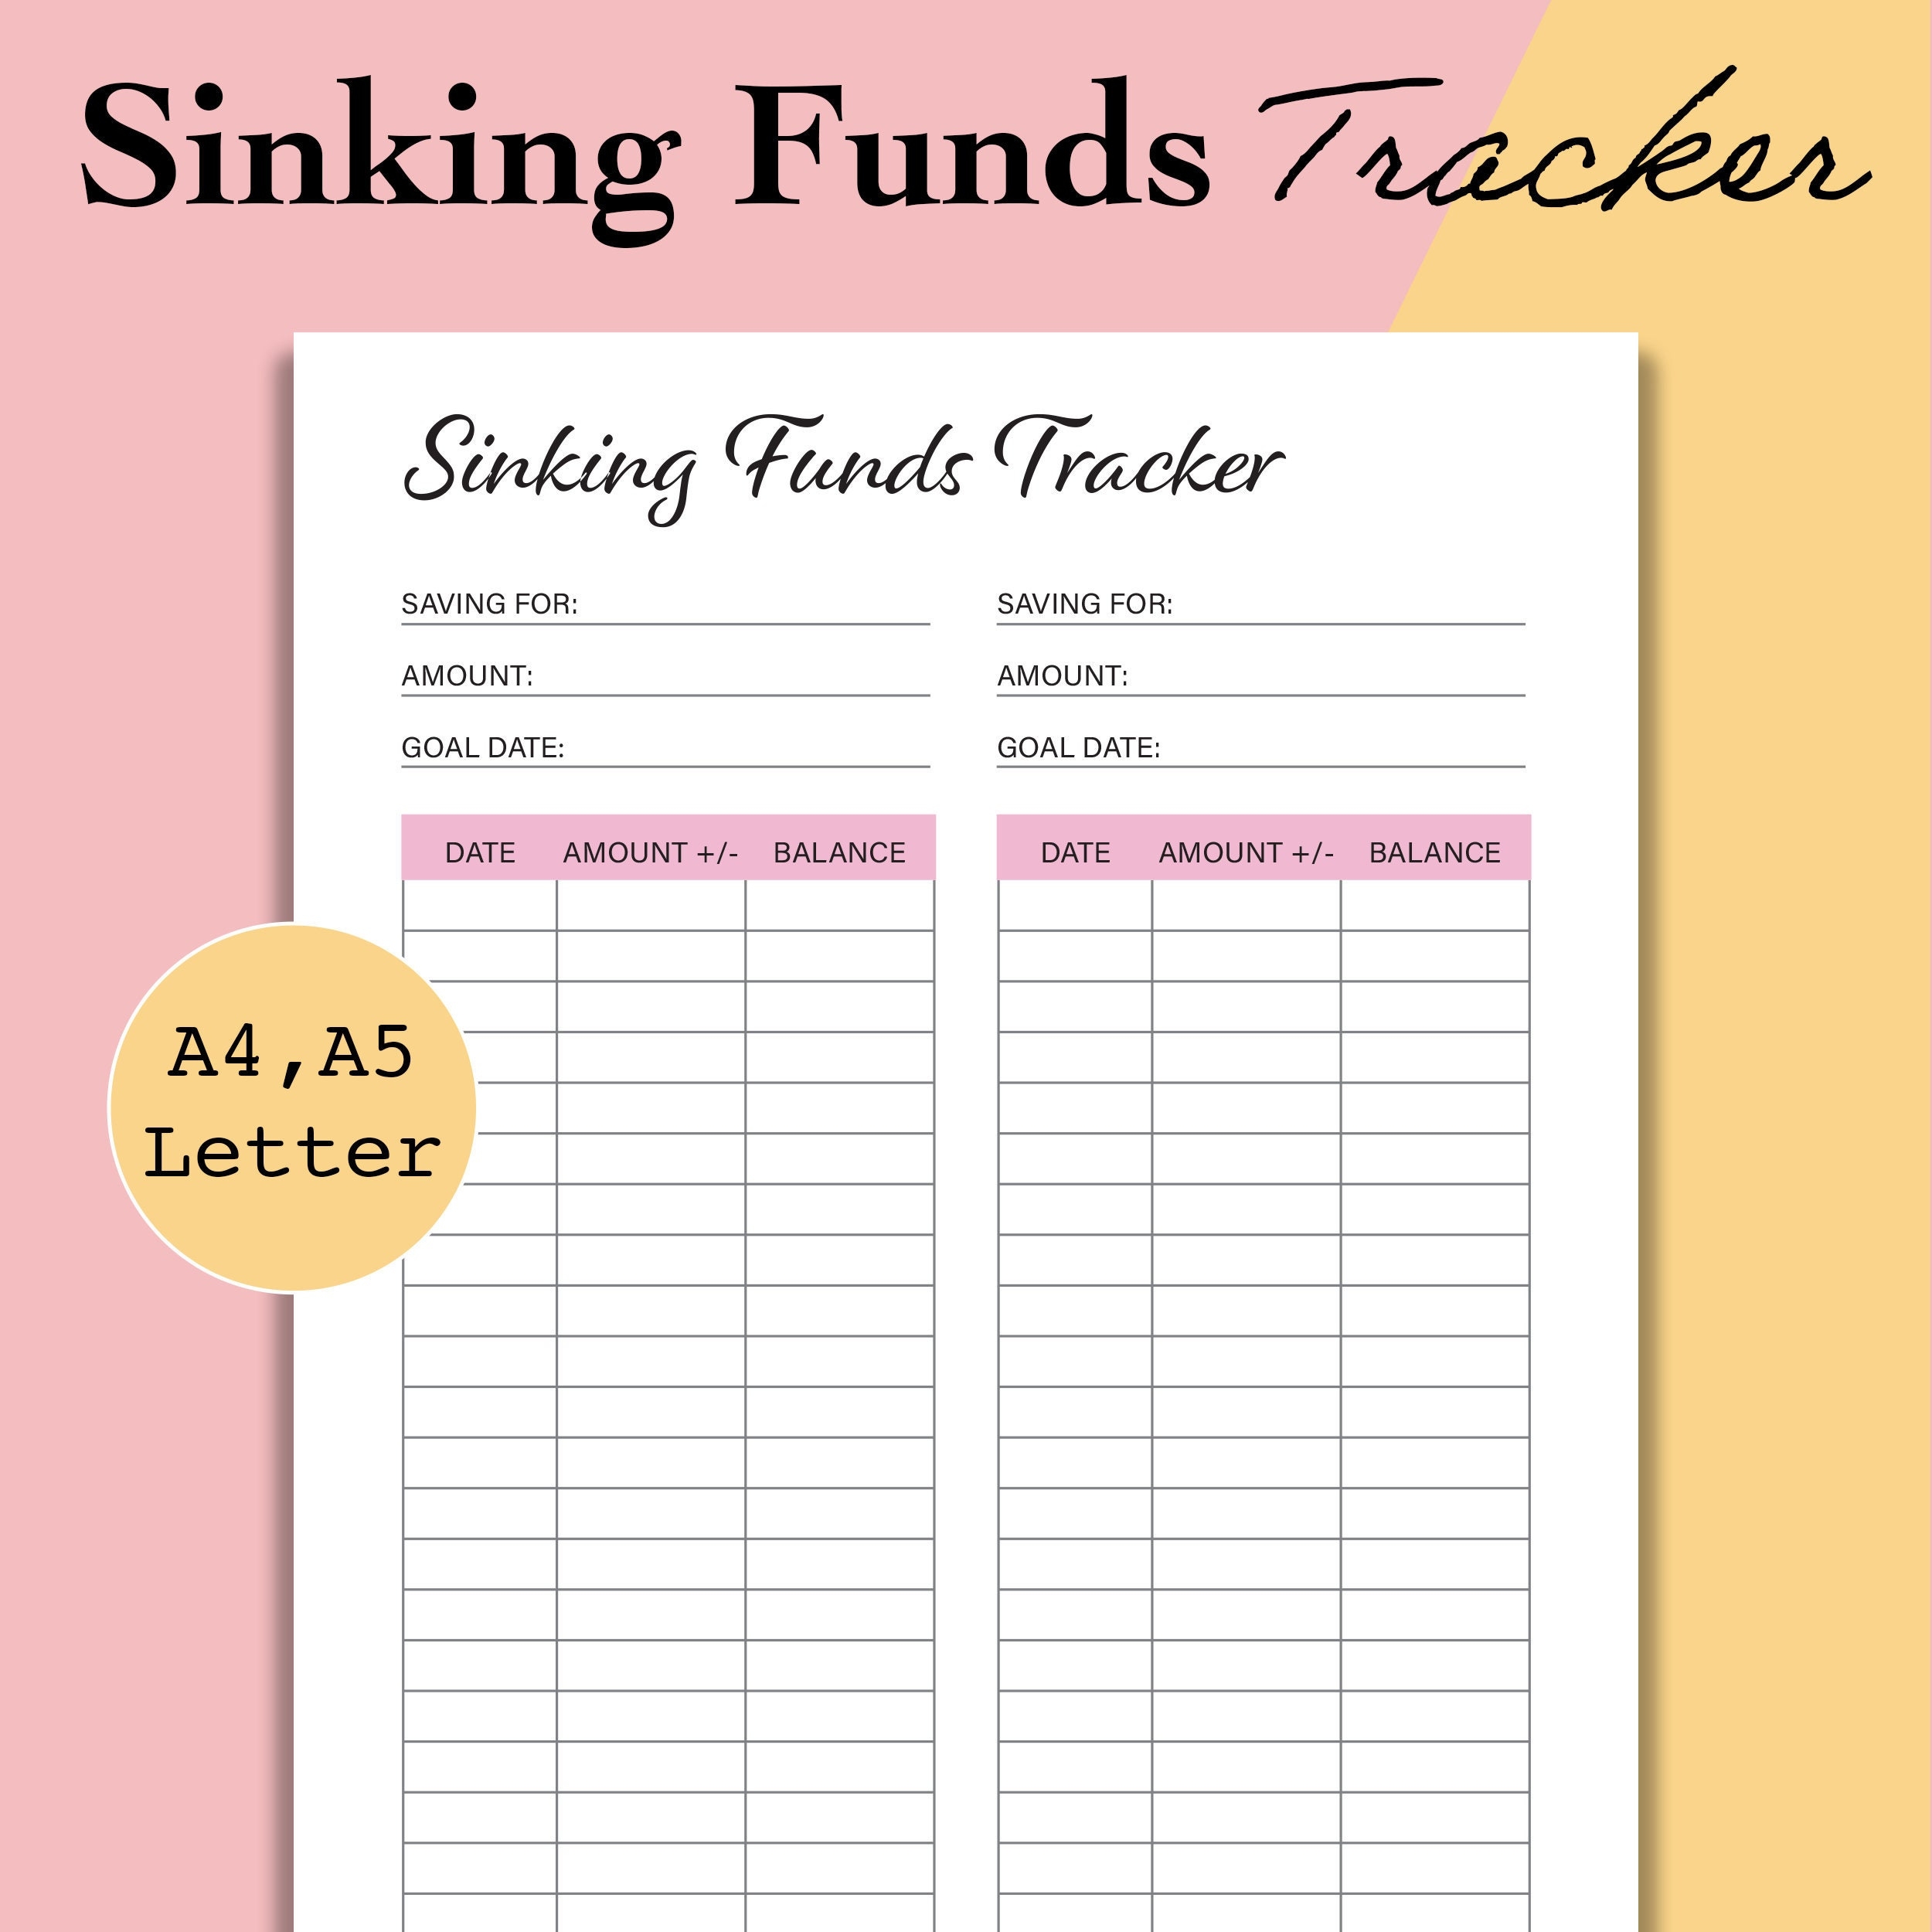 Sinking Funds Tracker Printable Savings Tracker Template Savings Goal Tracker Savings Worksheet Insert Dave Ramsey A5 A4 Letter Etsy